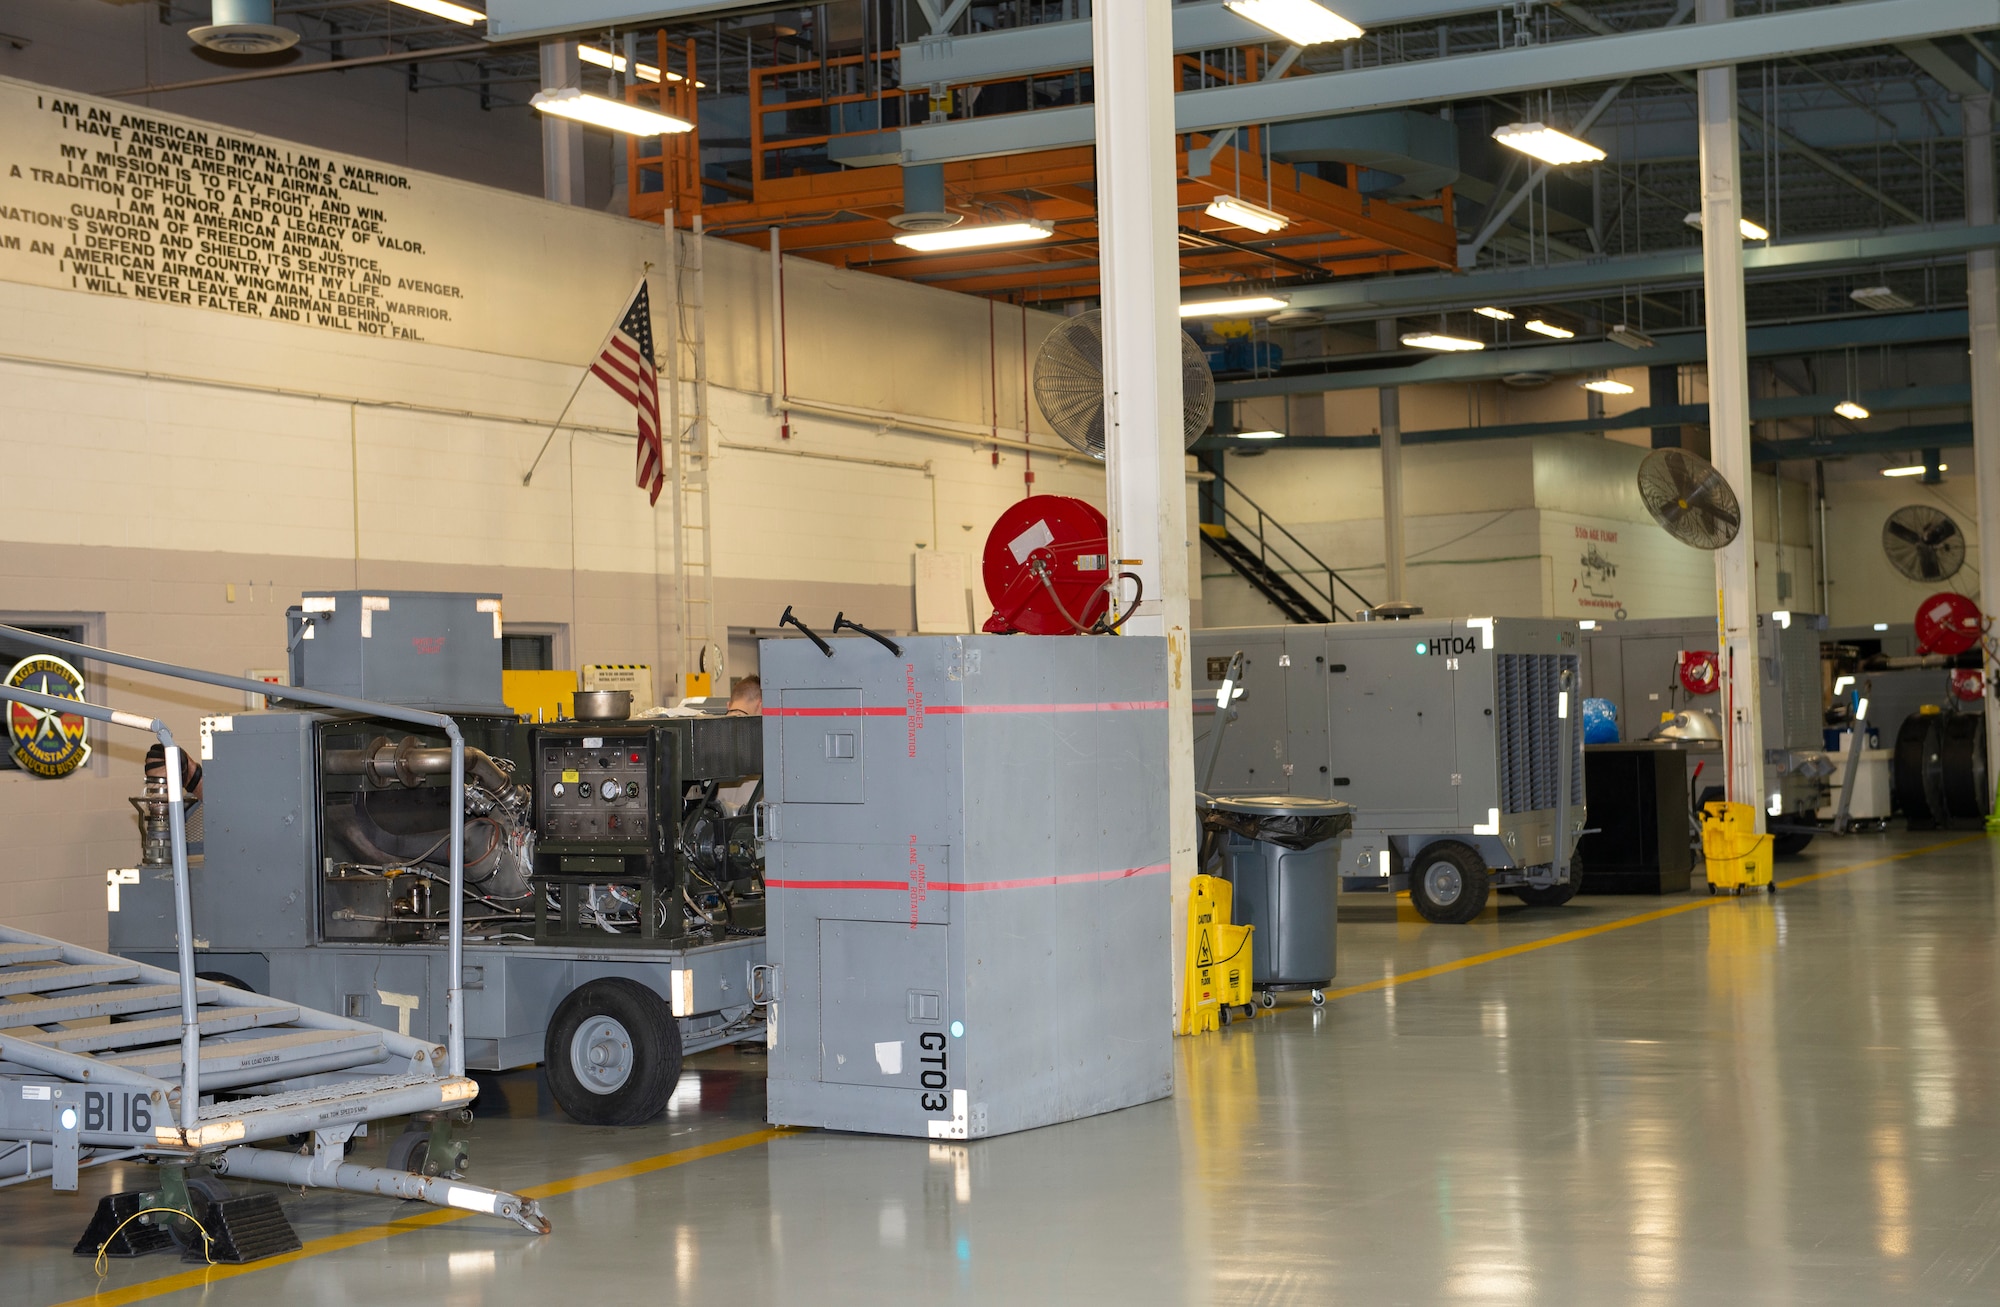 The 55th Maintenance Squadron aerospace ground equipment shop is now fully operational at the Bennie L. Davis Maintenance Facility at Offutt Air Force Base, Neb., Nov. 18, 2019. The AGE shop was displaced to another location on base after their facility received damage during the historical flood earlier this year.